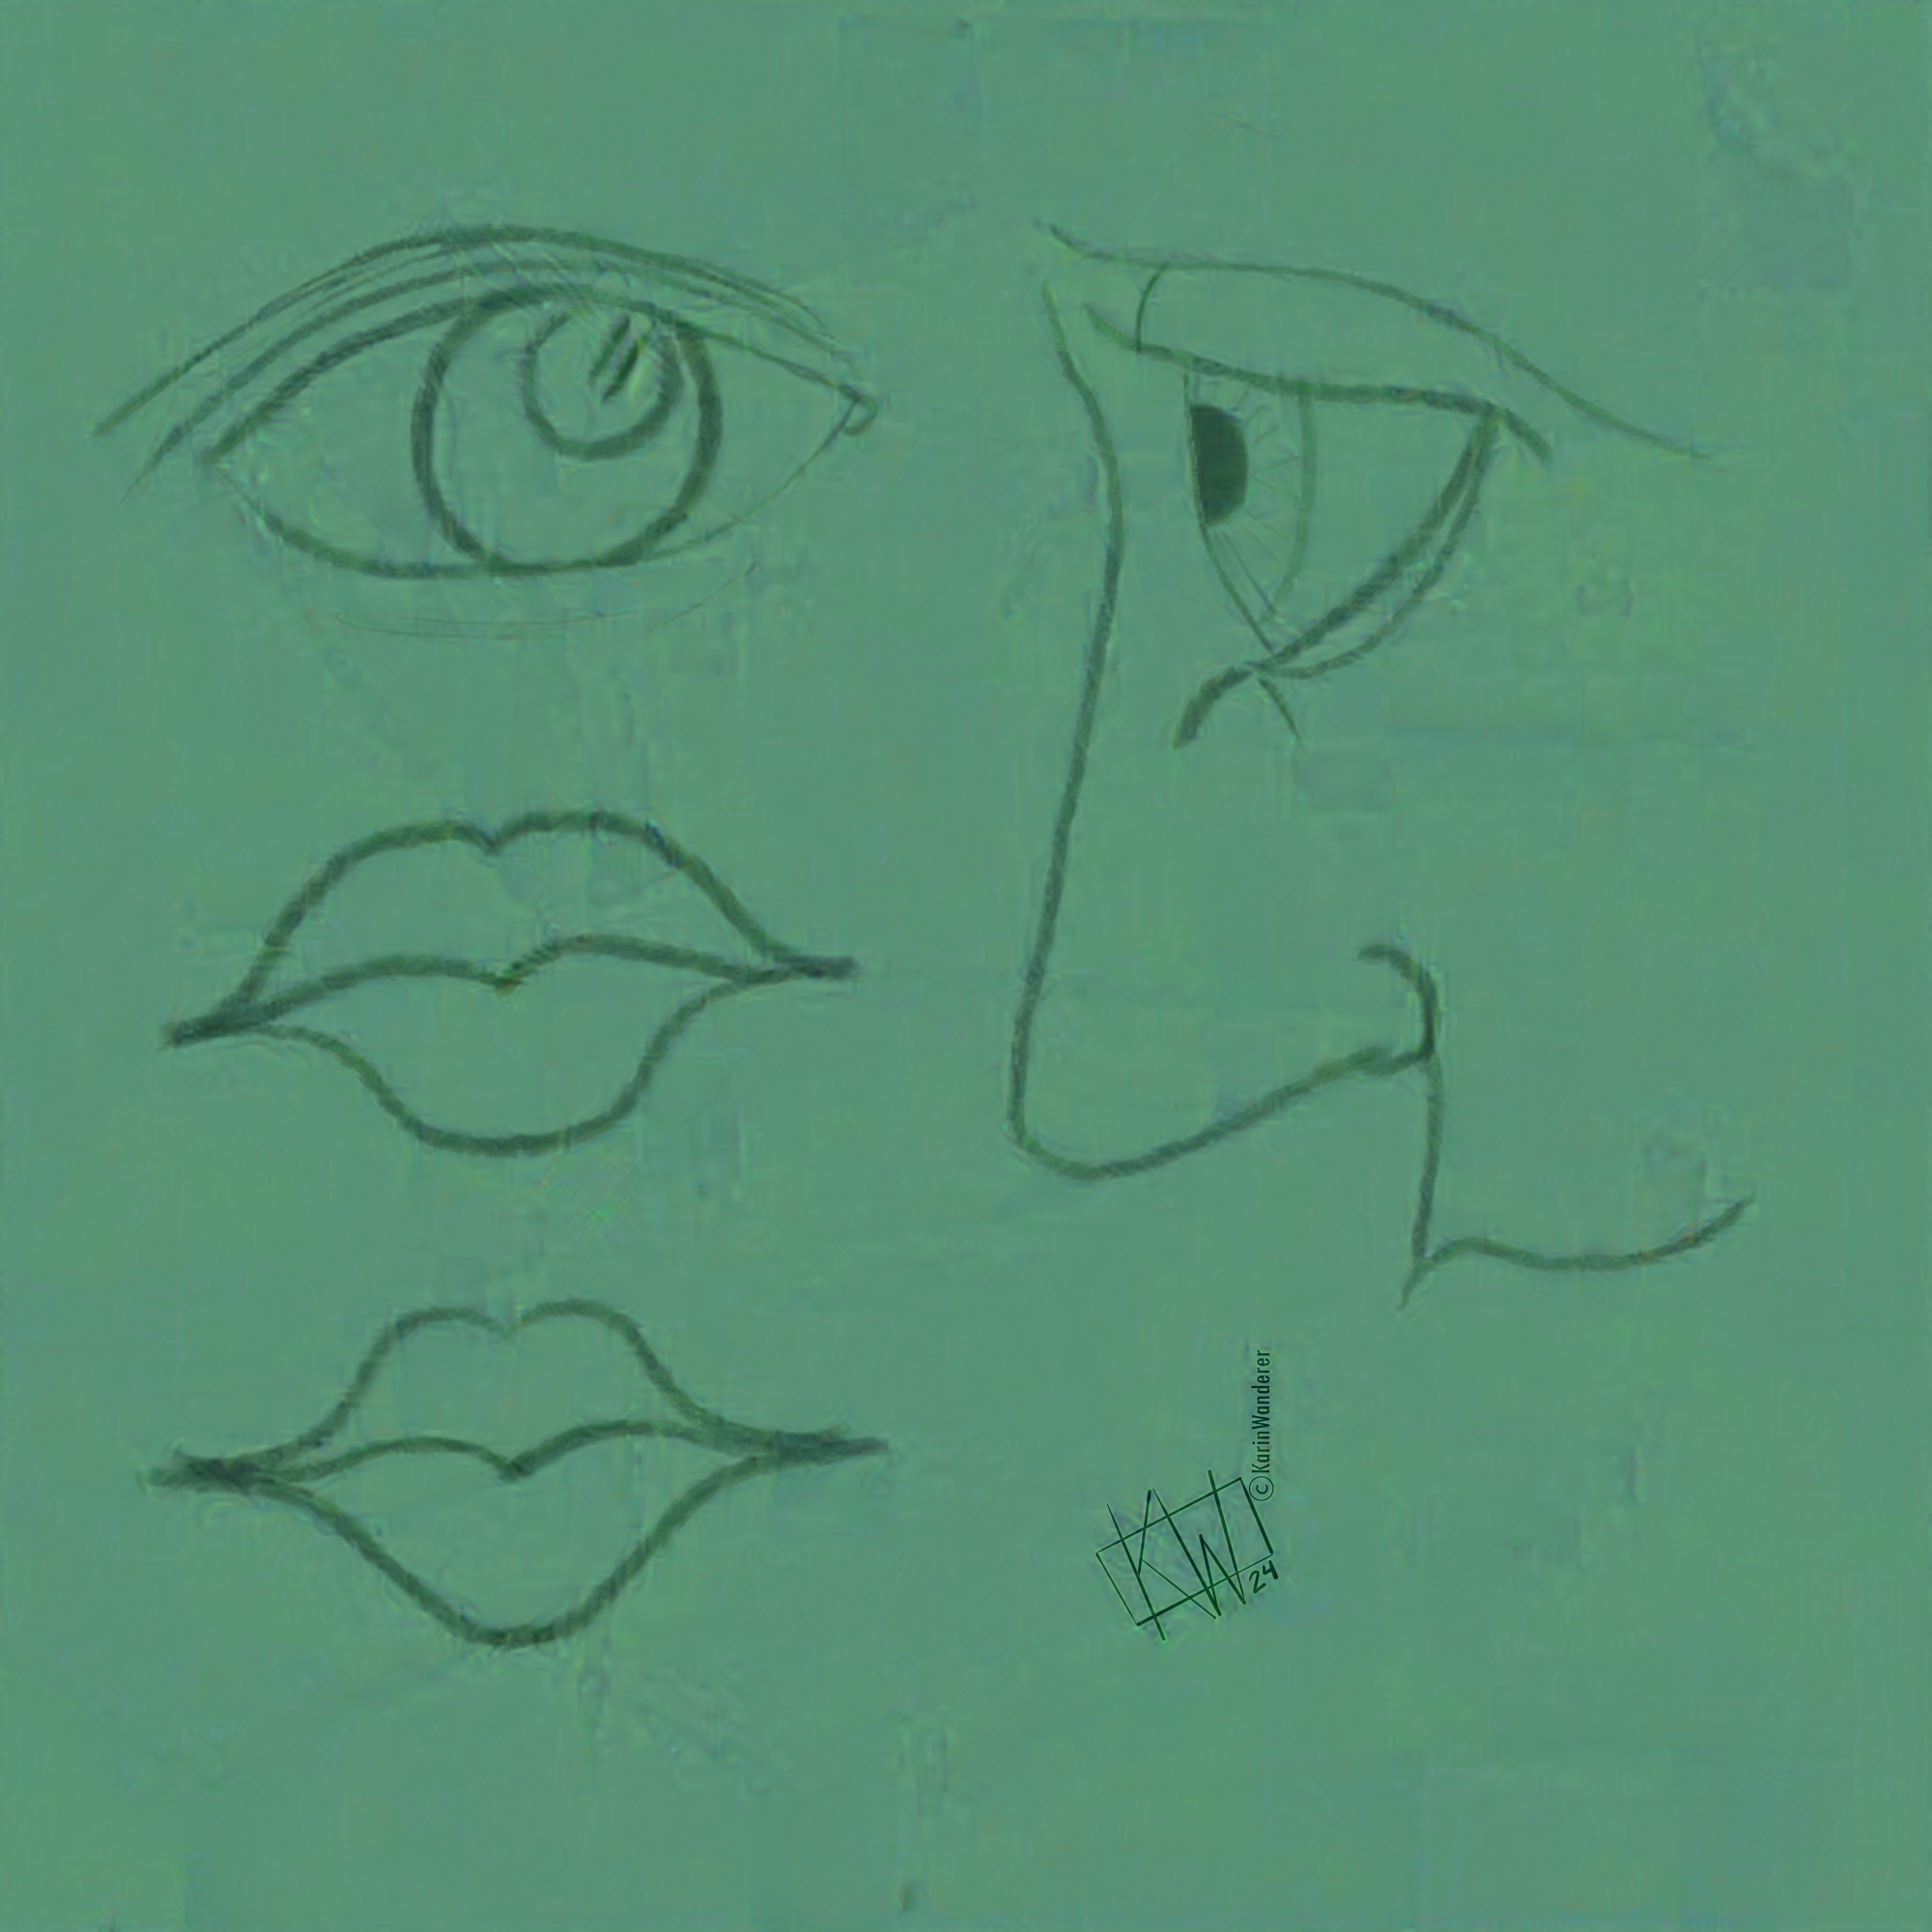 Digital drawings of disembodied eyes, lips, & half a face in profile from the brow line to the upper lip.